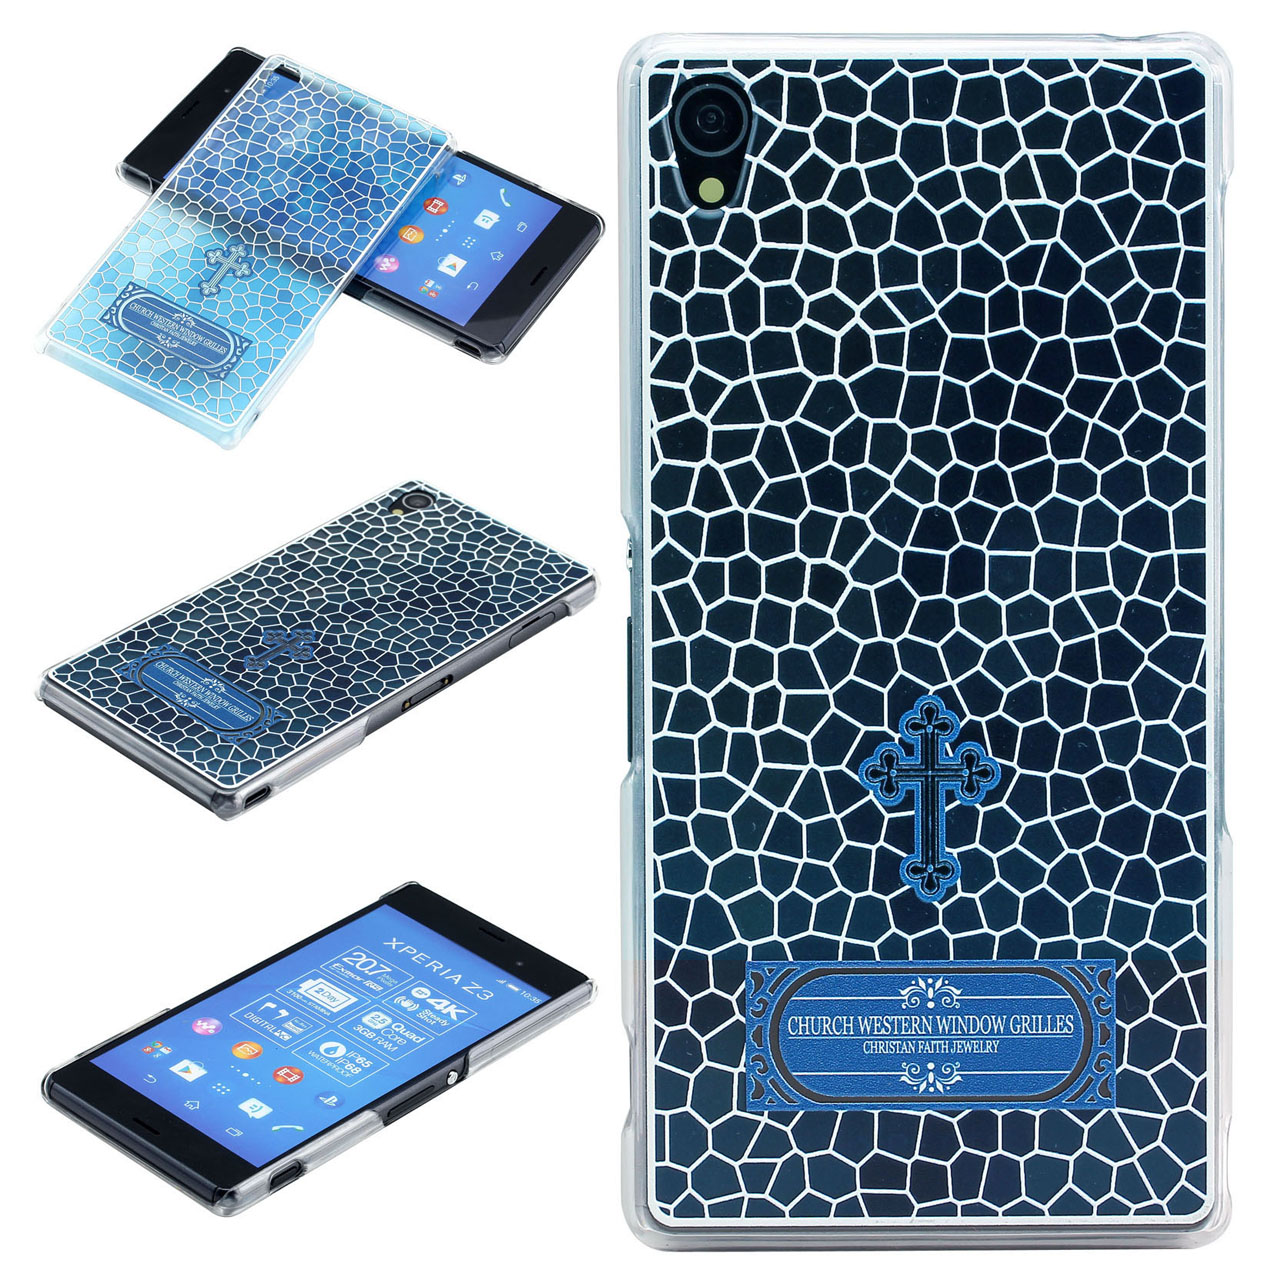 Yoption Sony Xperia Z3 Case Cover-Yoption Stained Glass Gothic Church Cathedral Window Glass Case Jubilee Protective Protection Case Cover for Sony Xperia Z3(Translucent Blue)